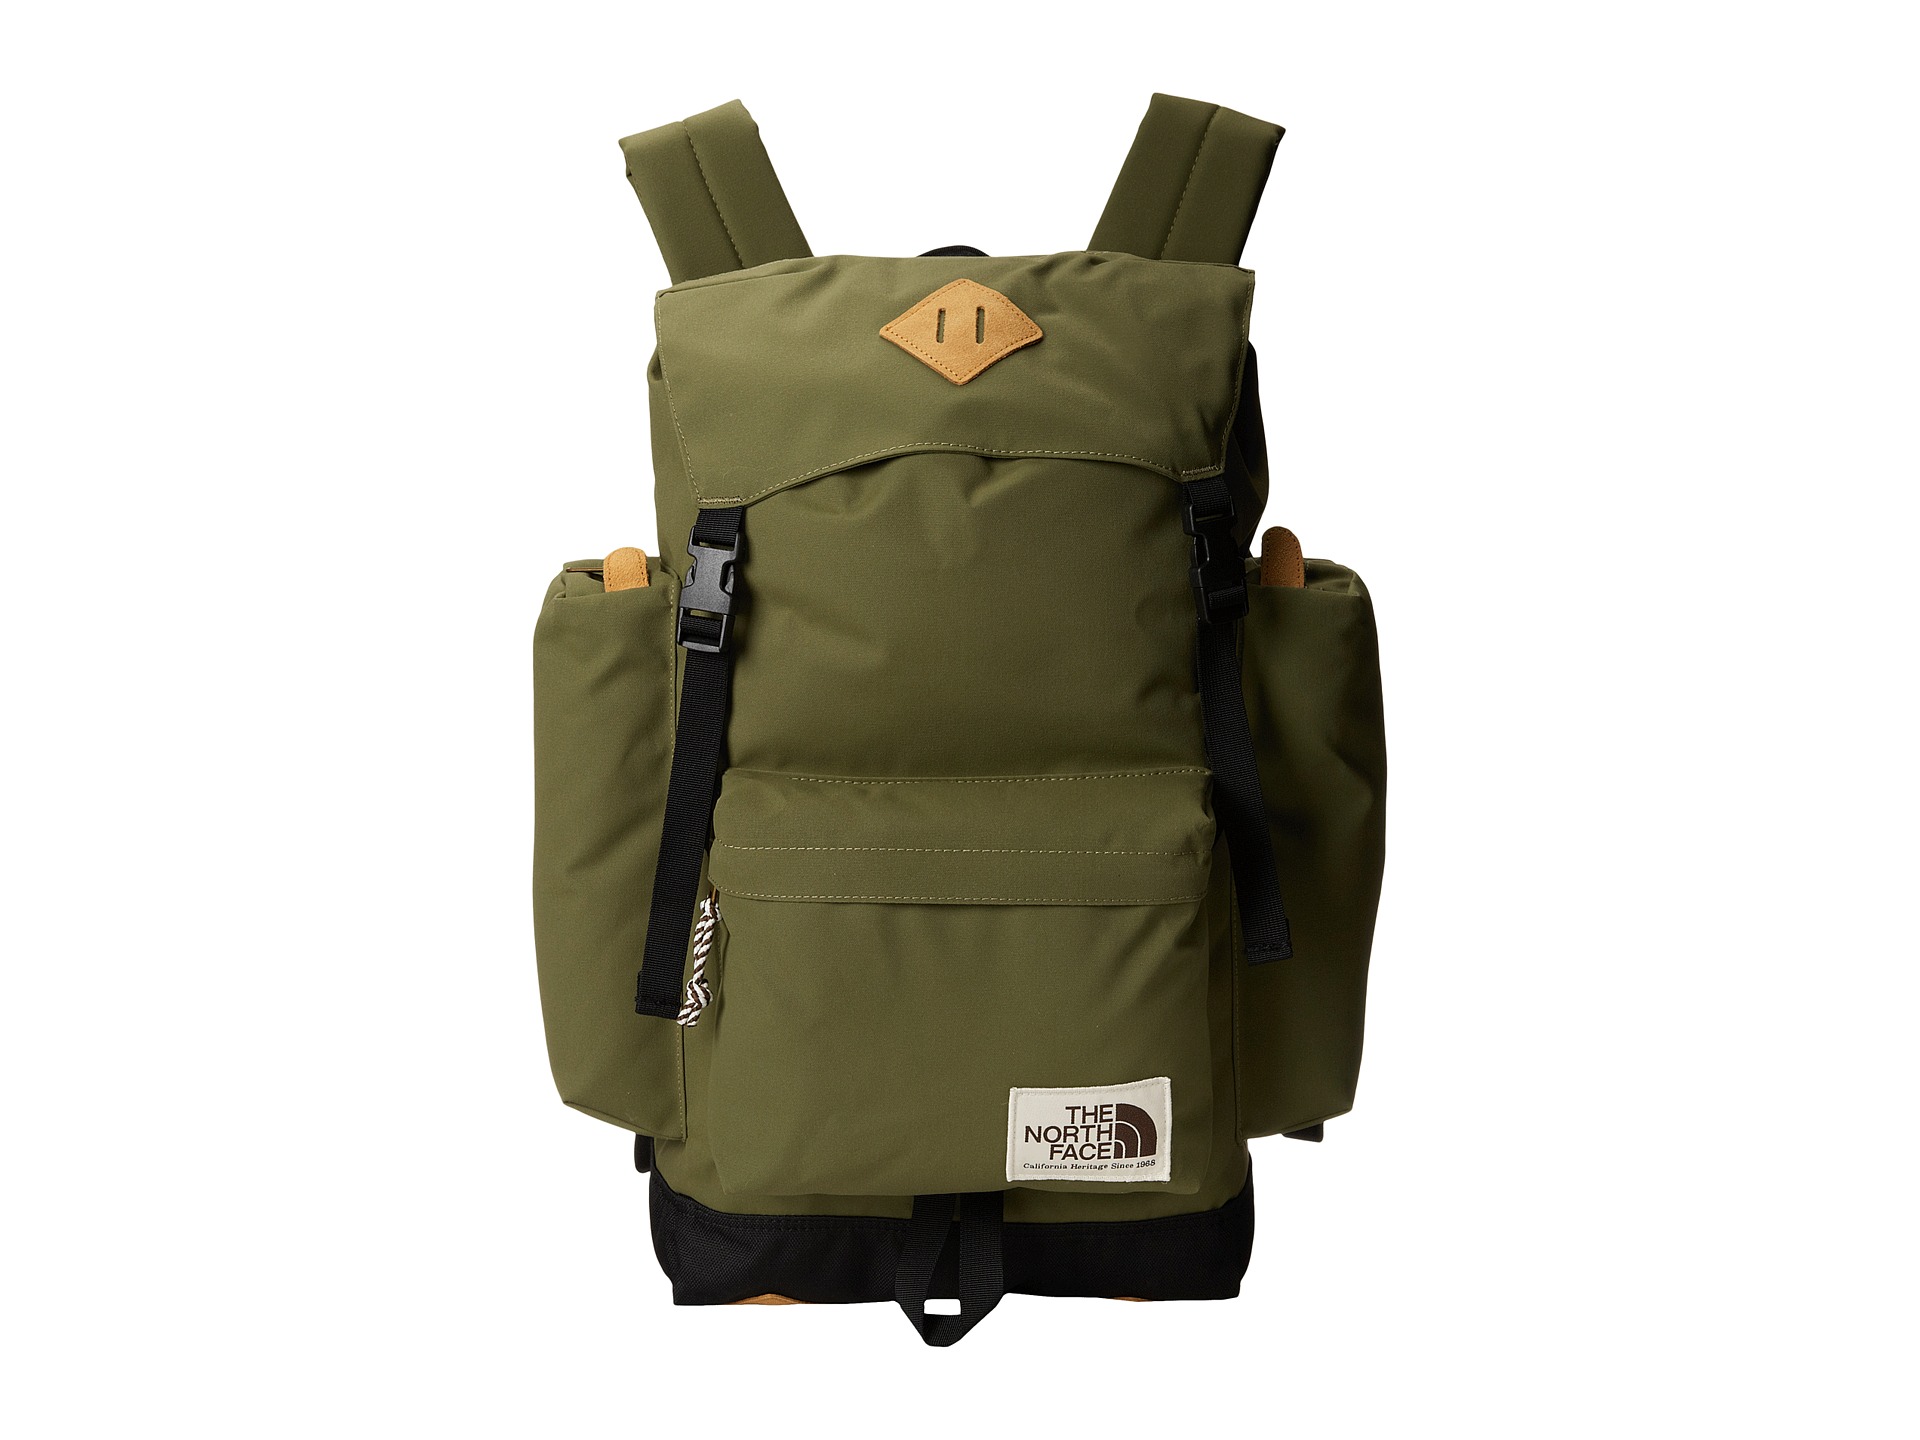 The North Face Rucksack - Zappos Free Shipping BOTH Ways